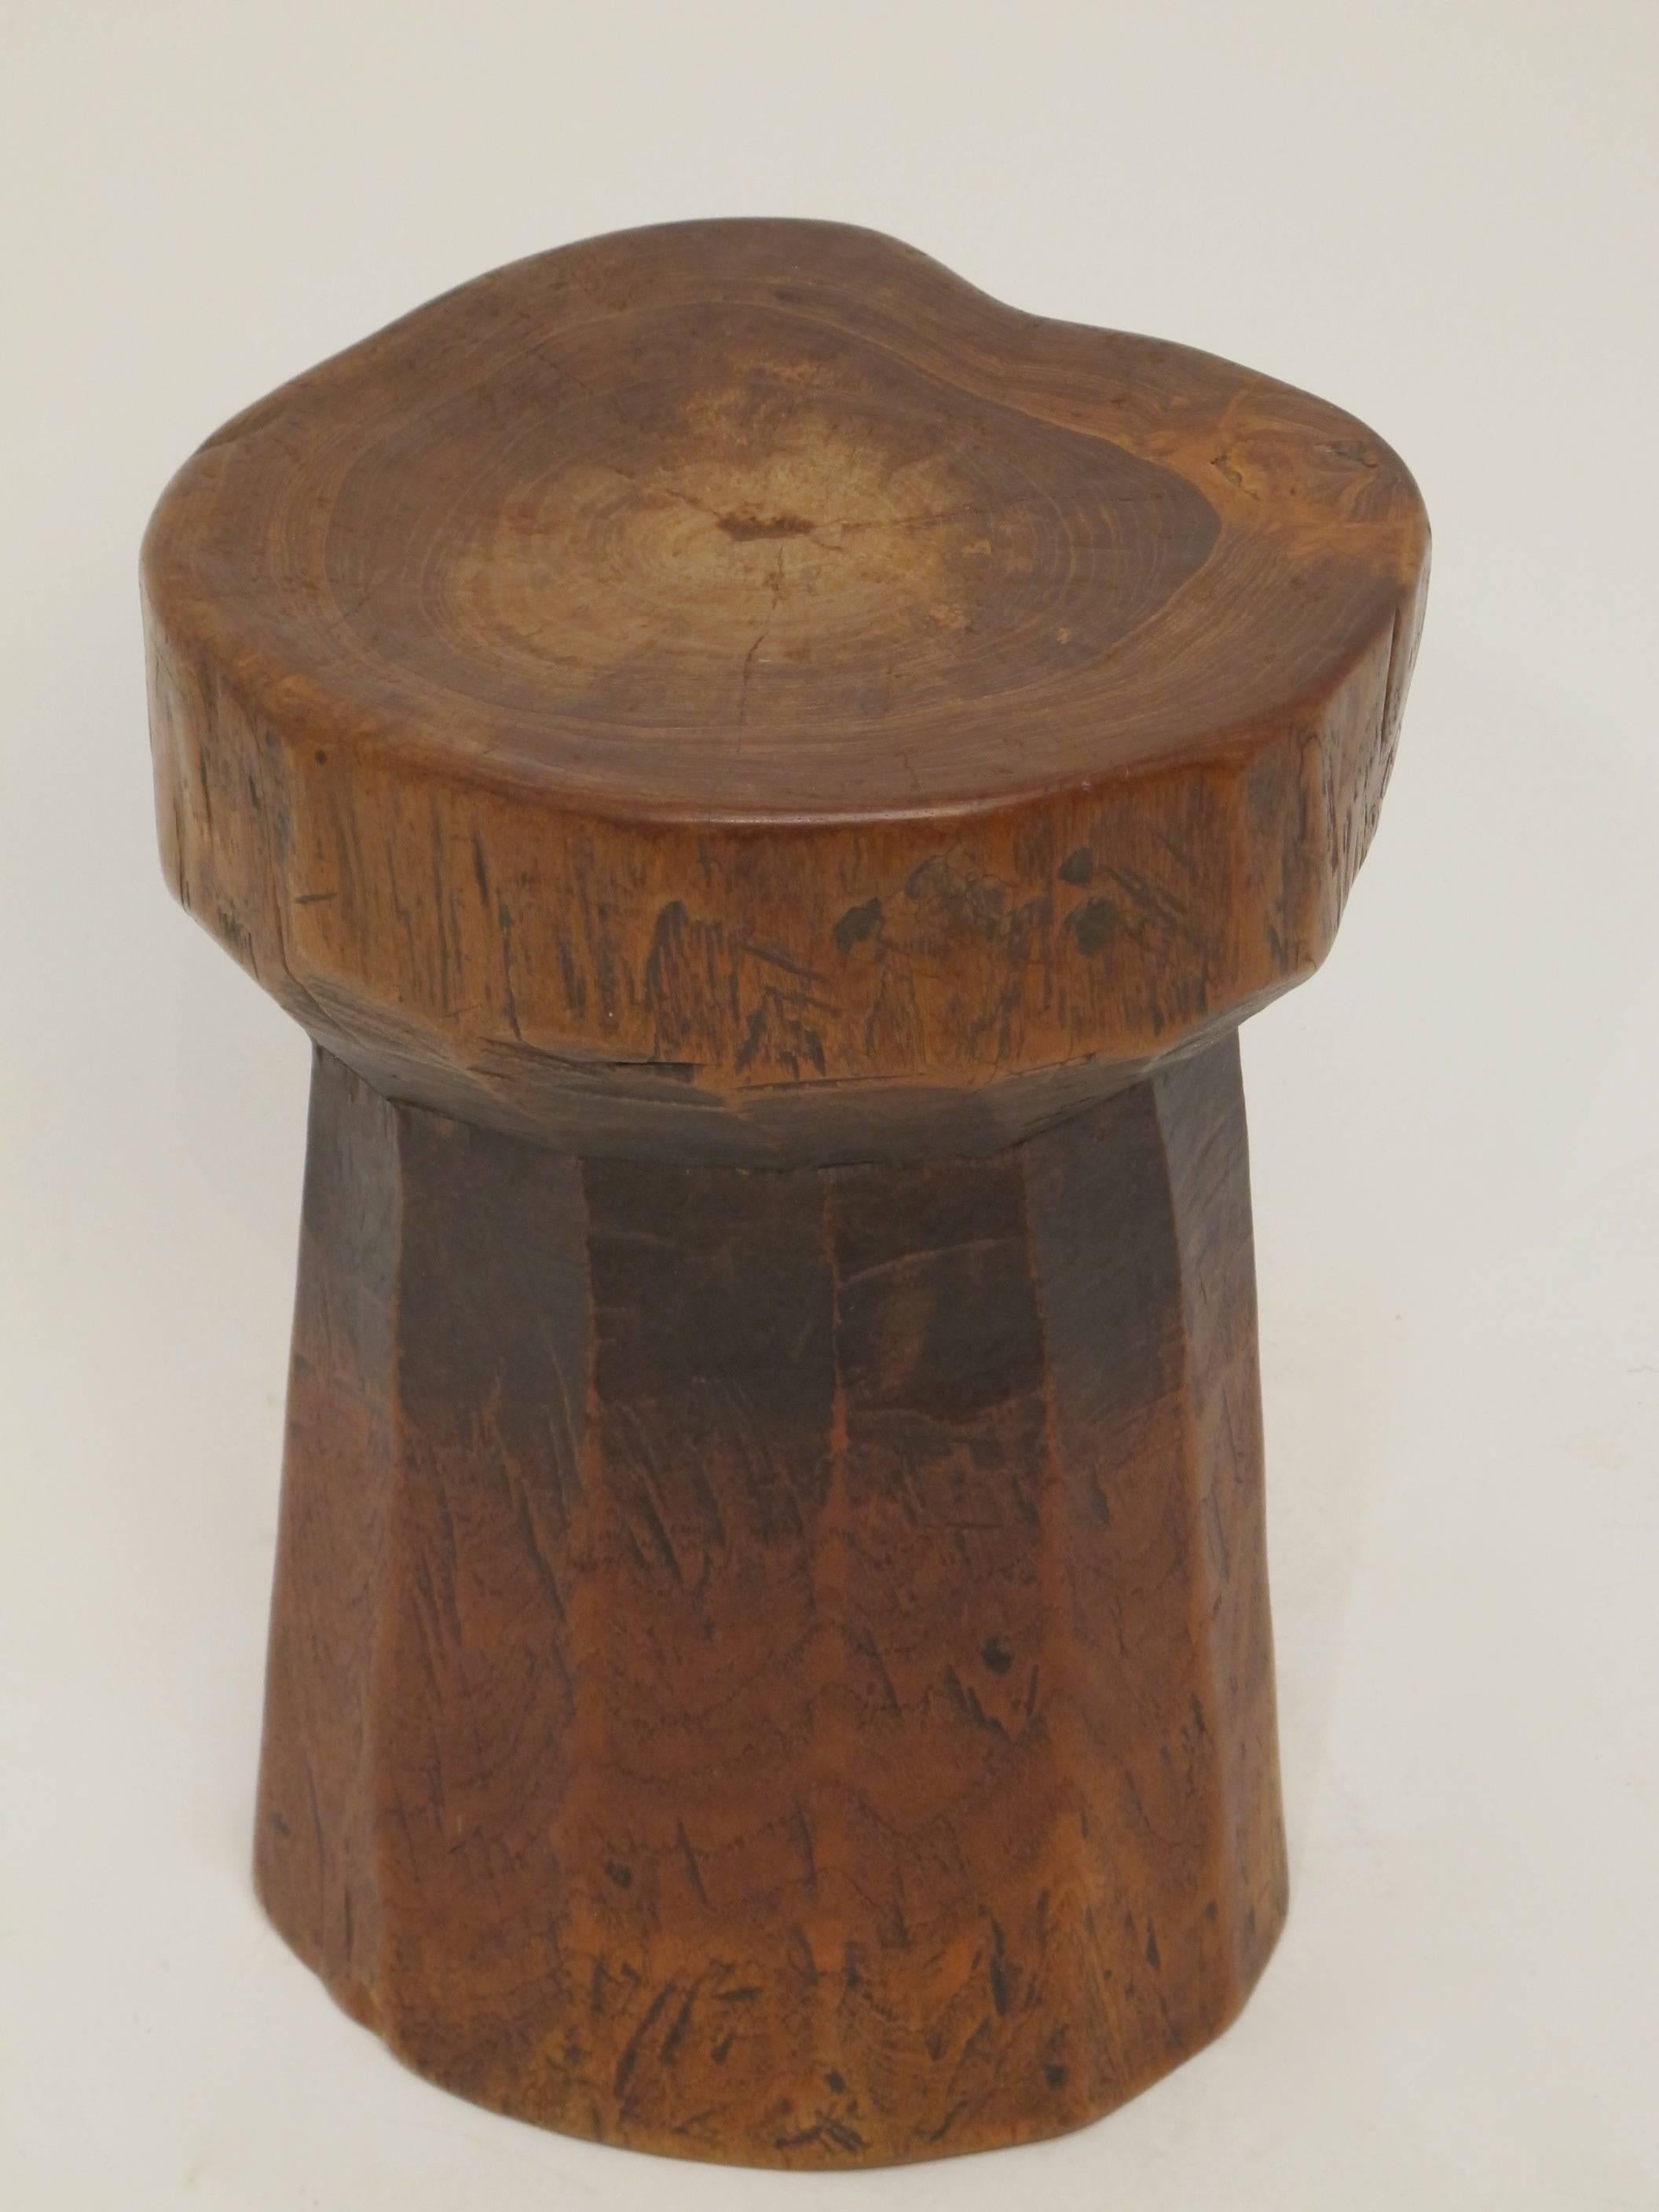 A 19th century hand hewn elm wood garden seat or stool.